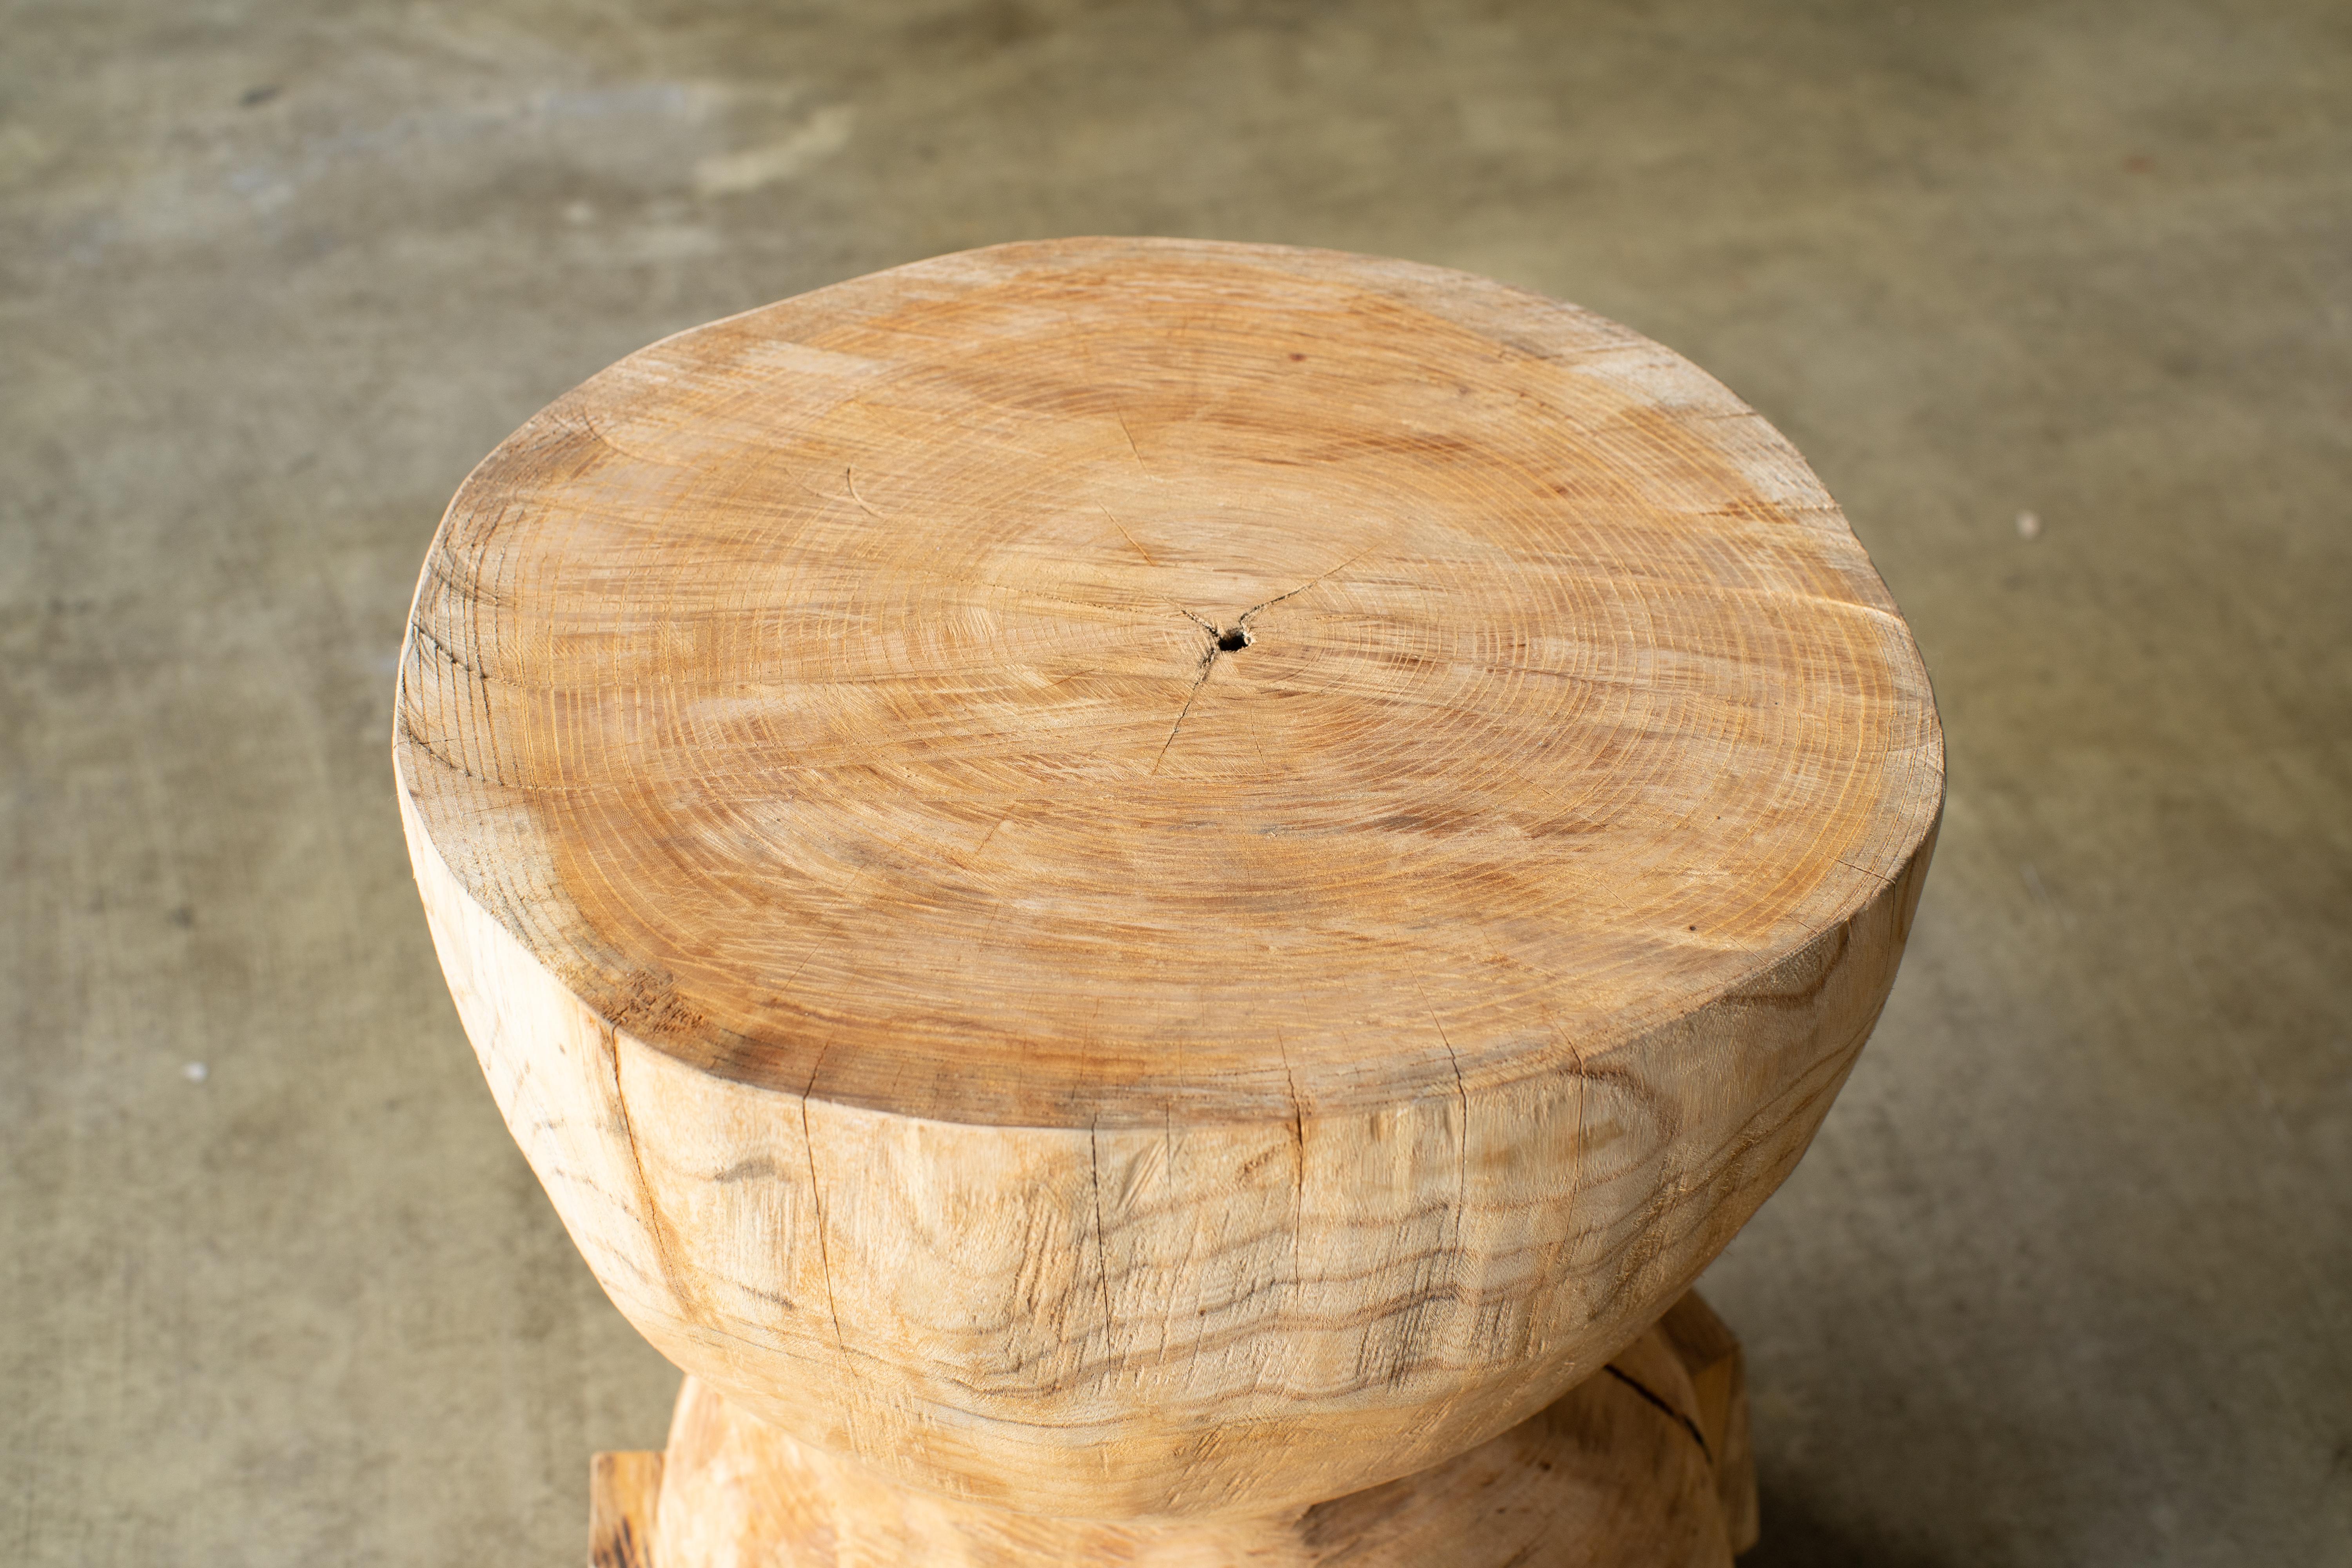 Contemporary Hiroyuki Nishimura Furniture Sculptural Wood Side Table 2 Tribal Glamping For Sale